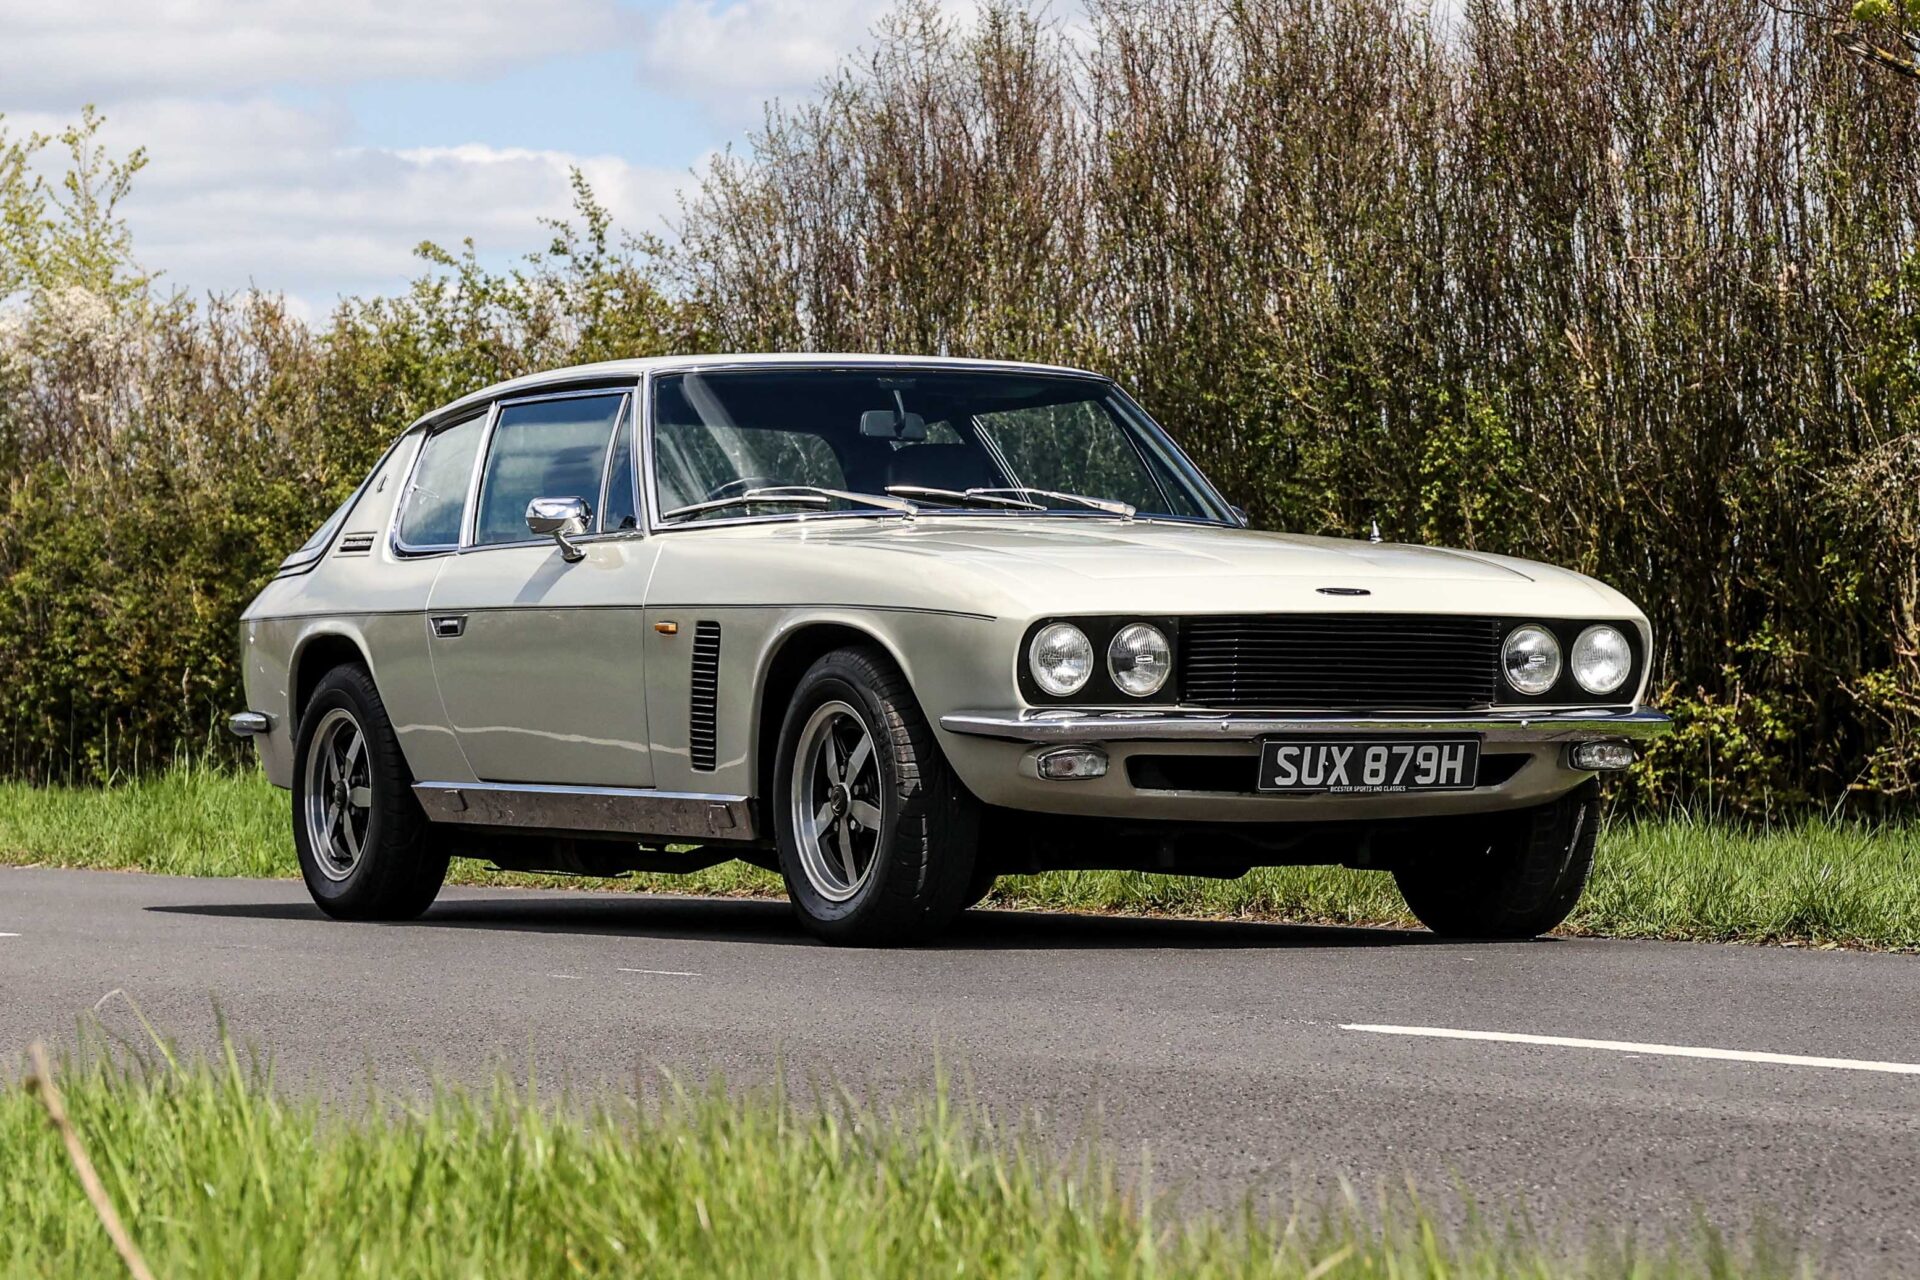 Poldark actor Robin Ellis's 1970 Jensen Interceptor II goes up for auction. The classic car, originally £8,000, now valued at £150,000, will be auctioned on 24 August.